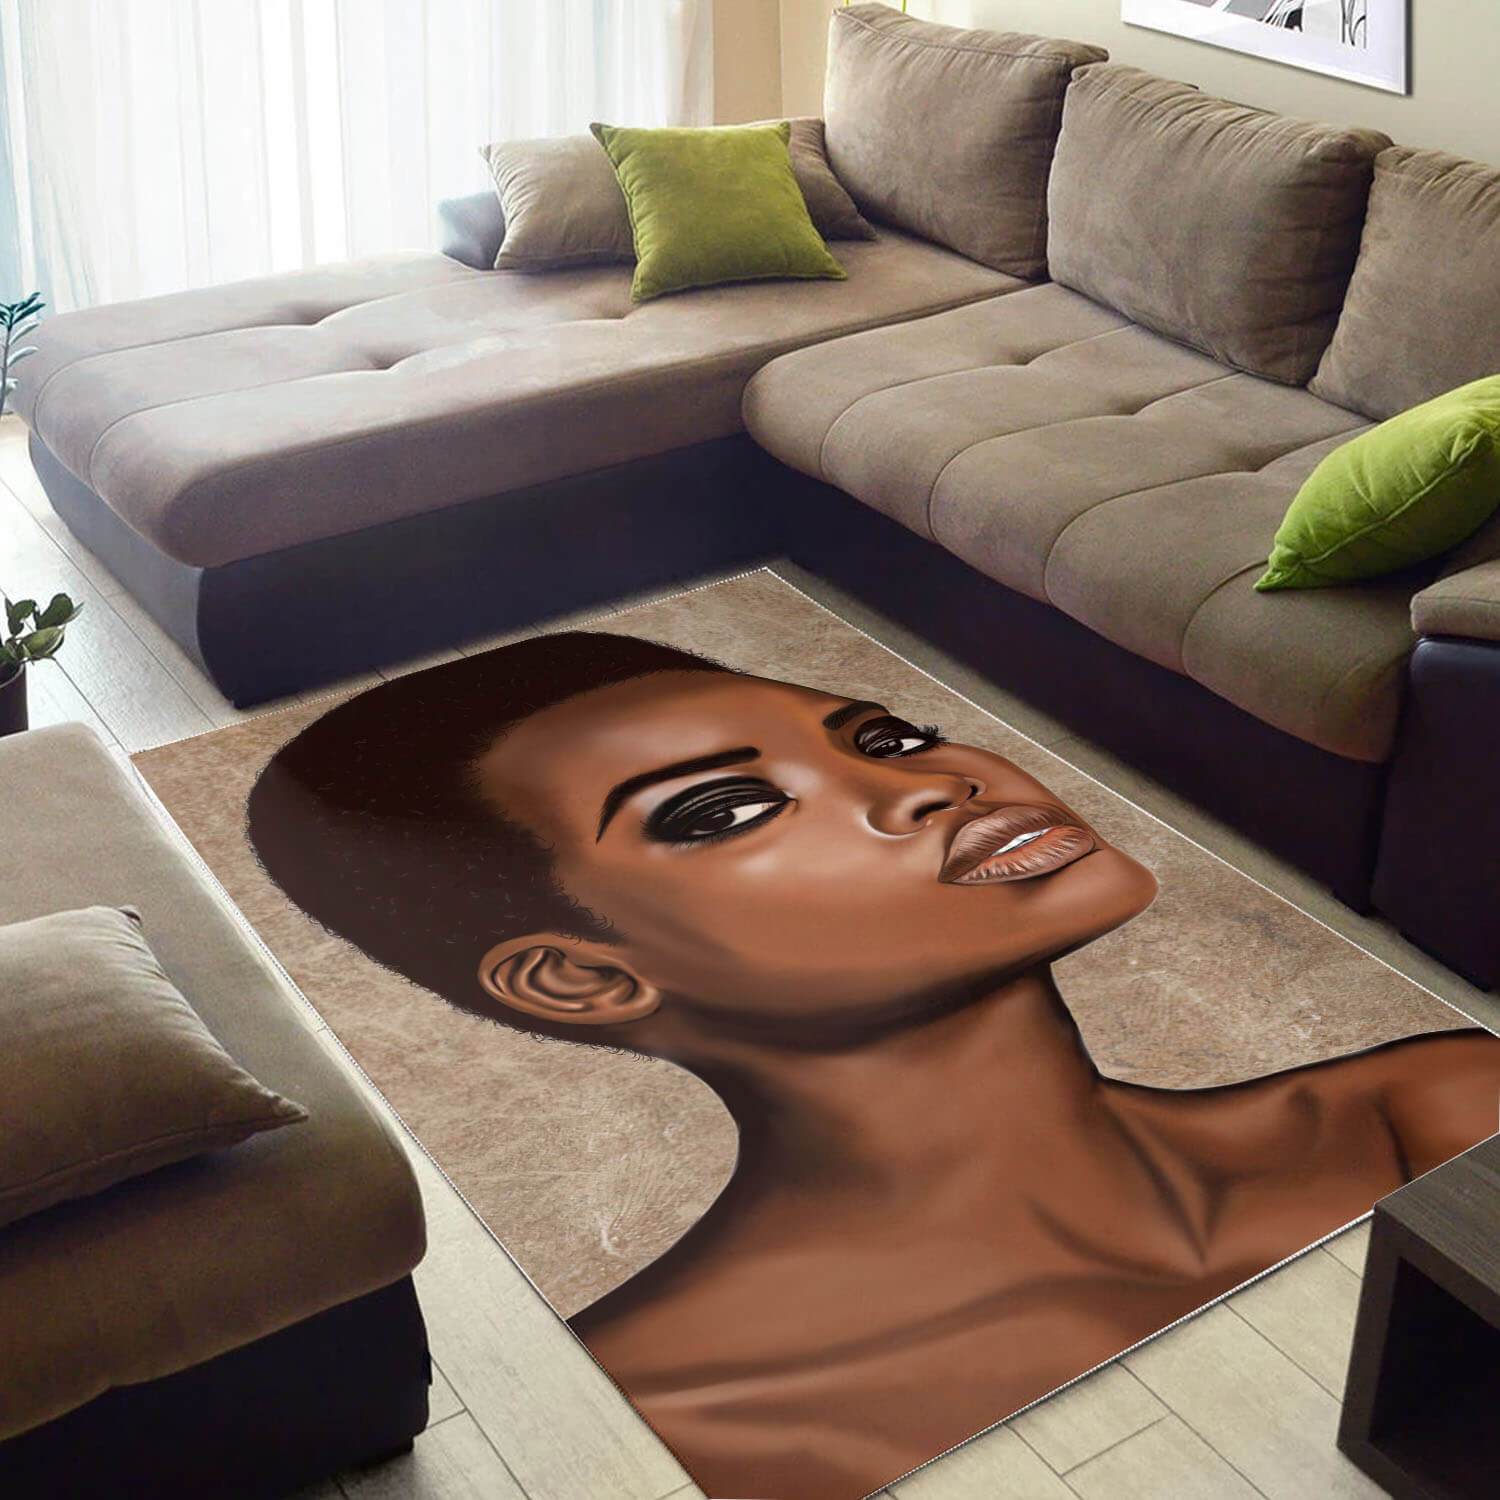 African American Area Rugs Beautiful Black Afro Lady African Design Floor Rug Afrocentric Room Decor WBG22774